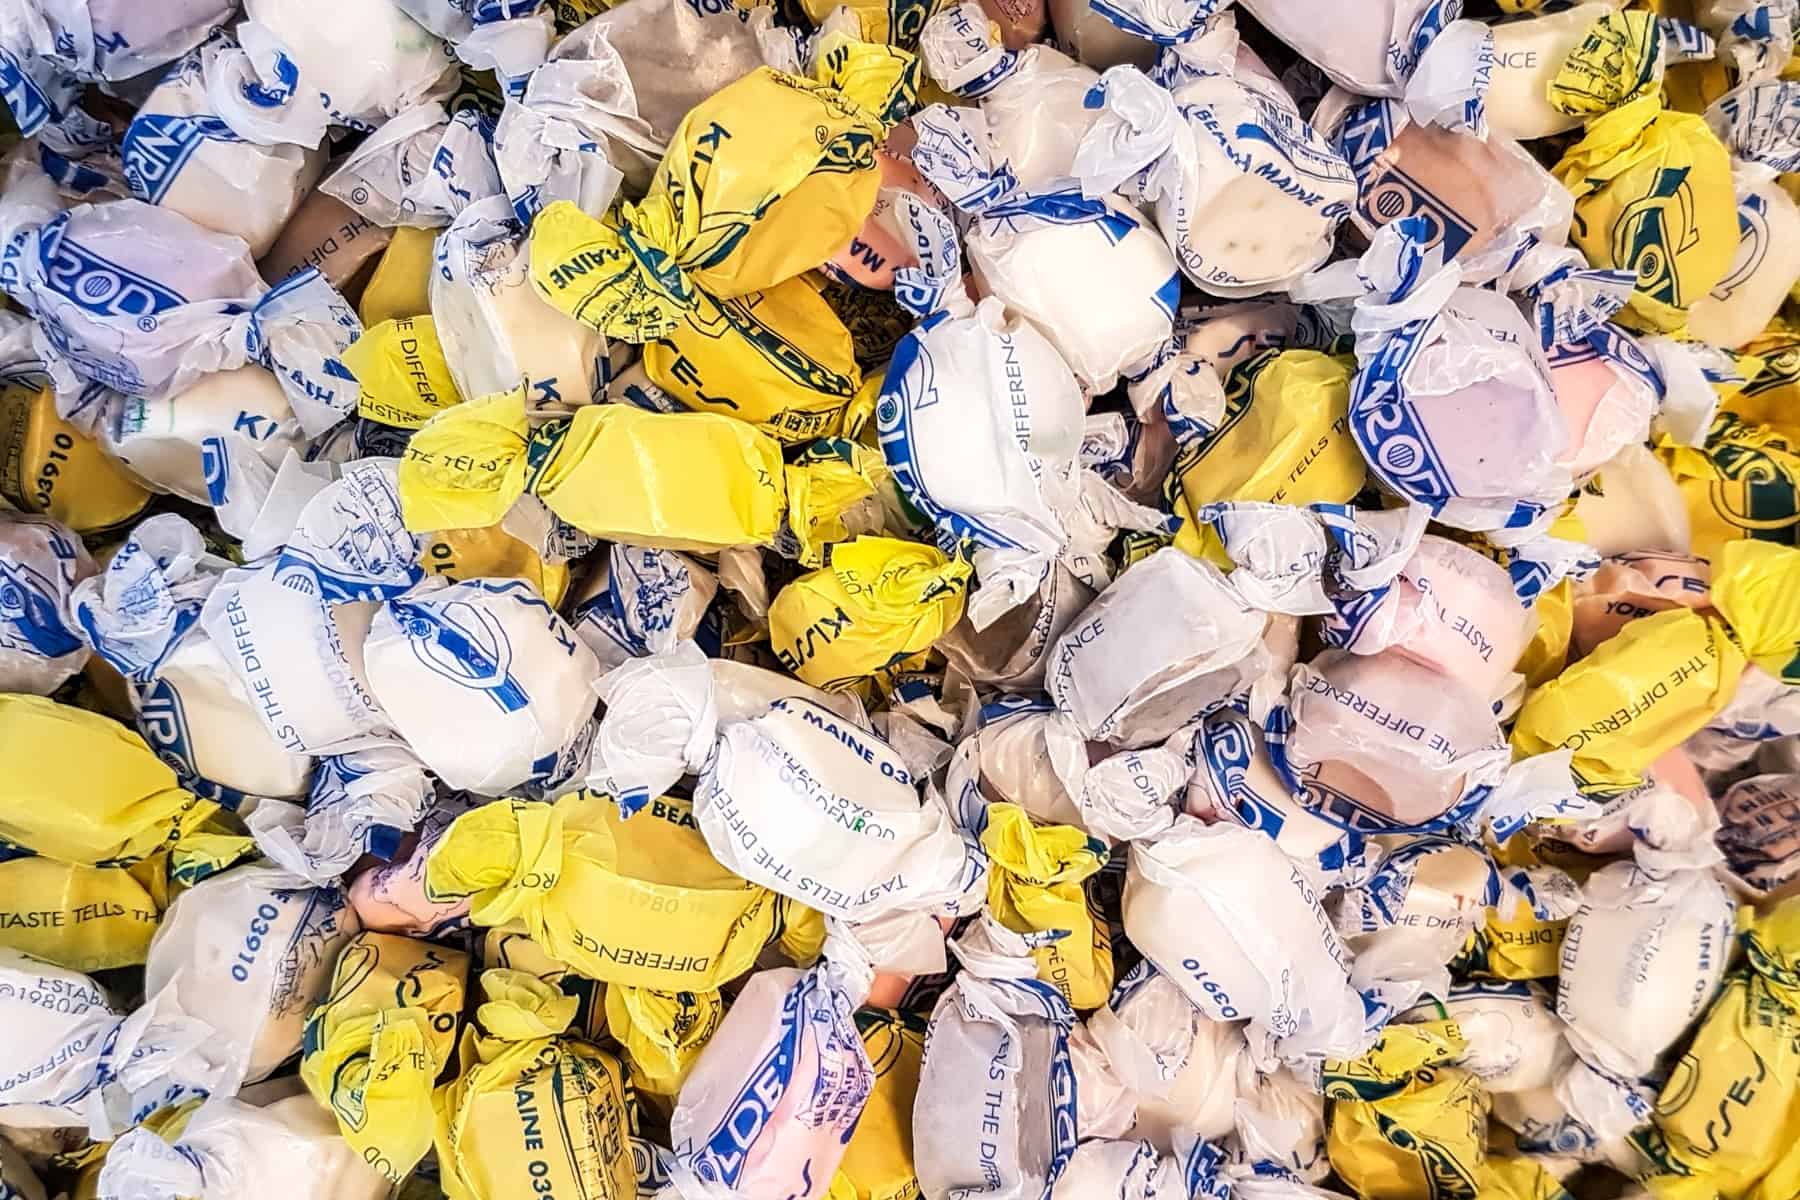 Saltwater taffy from Maine, distinguishable by their white and yellow candy wrappers. 